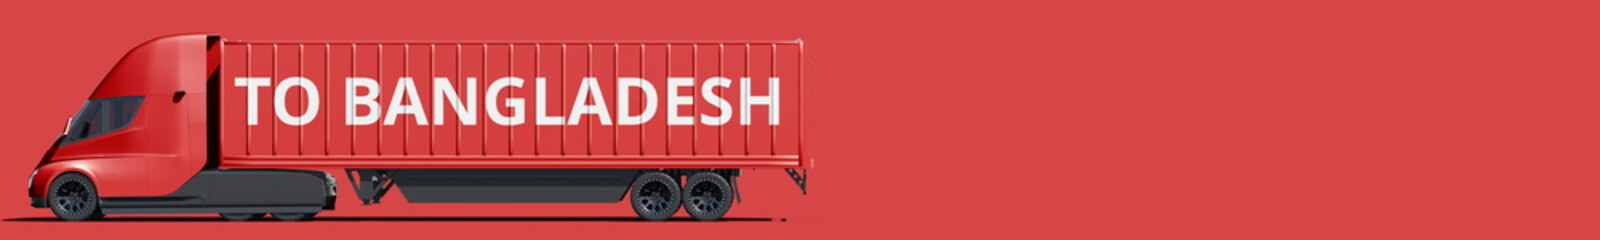 TO BANGLADESH text on the modern electric semi-trailer truck, 3d rendering